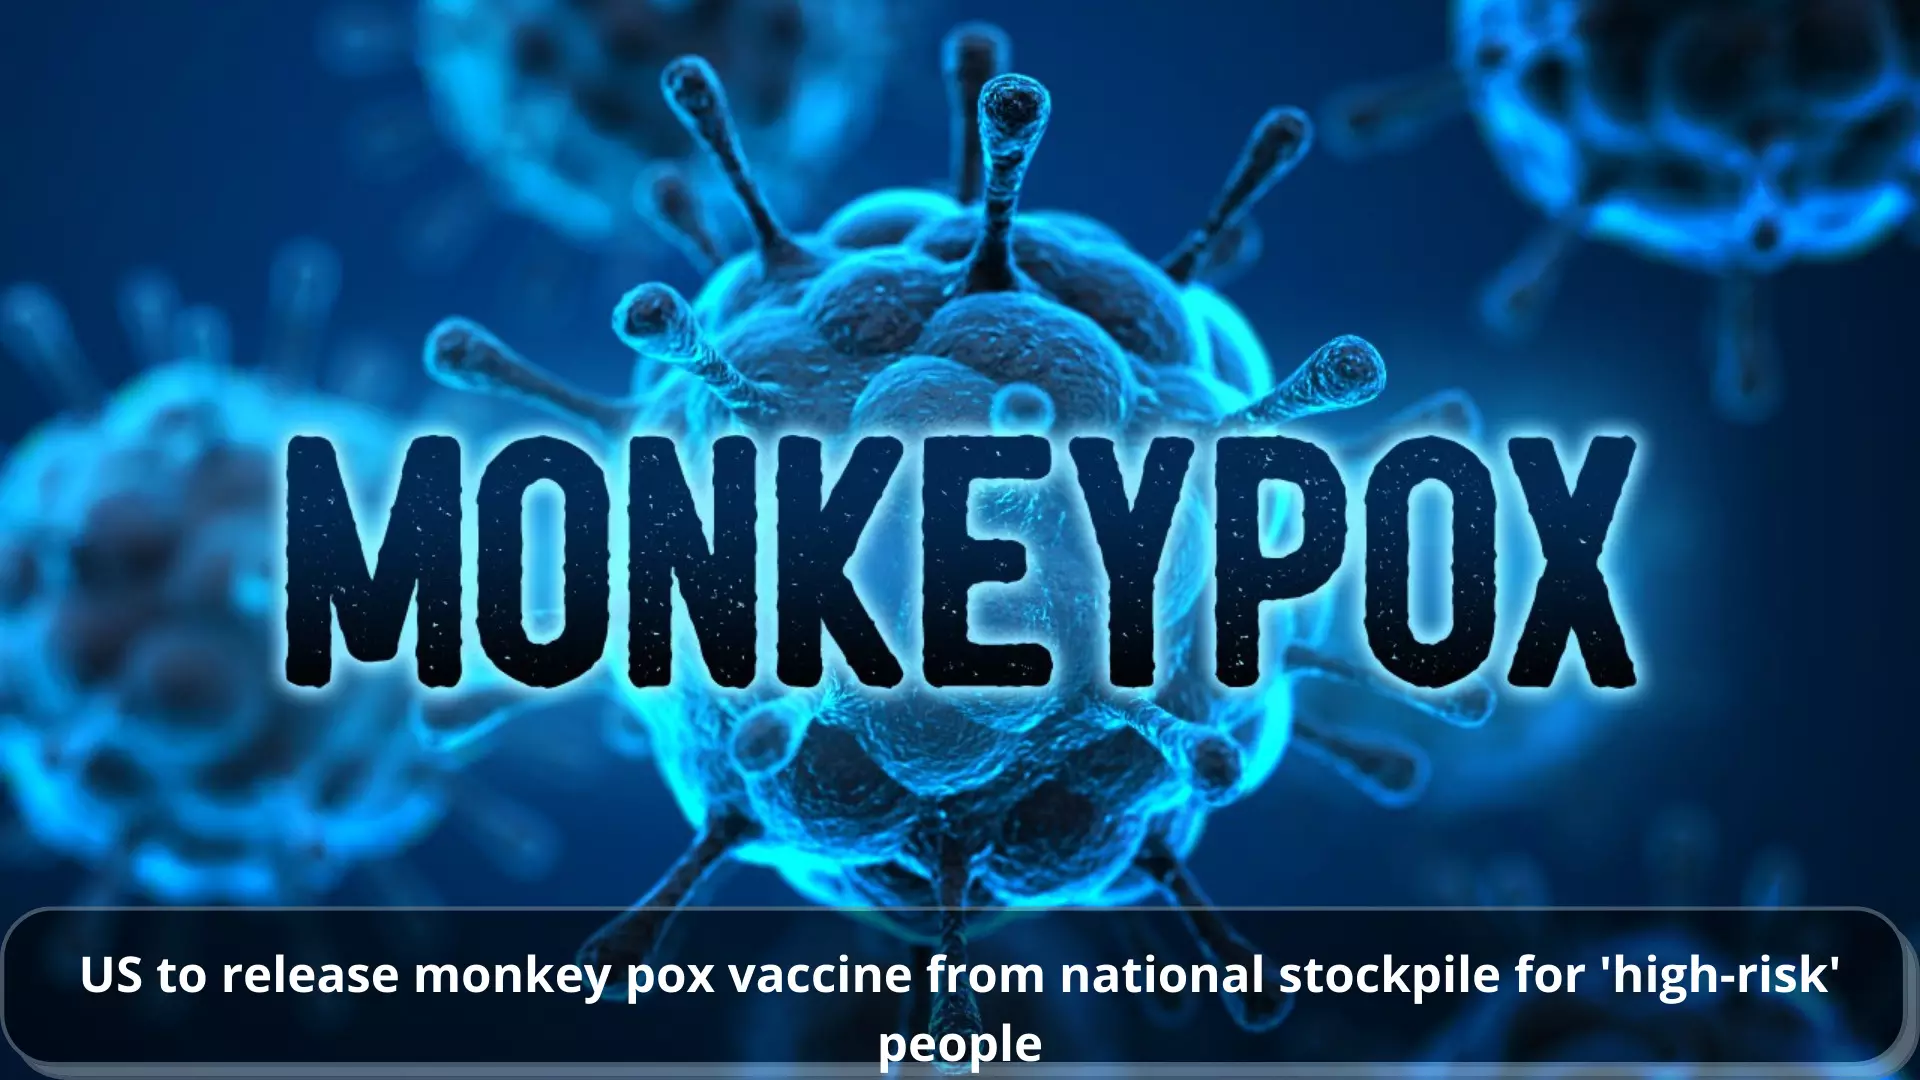 US to release monkey pox vaccine from national stockpile for high-risk people